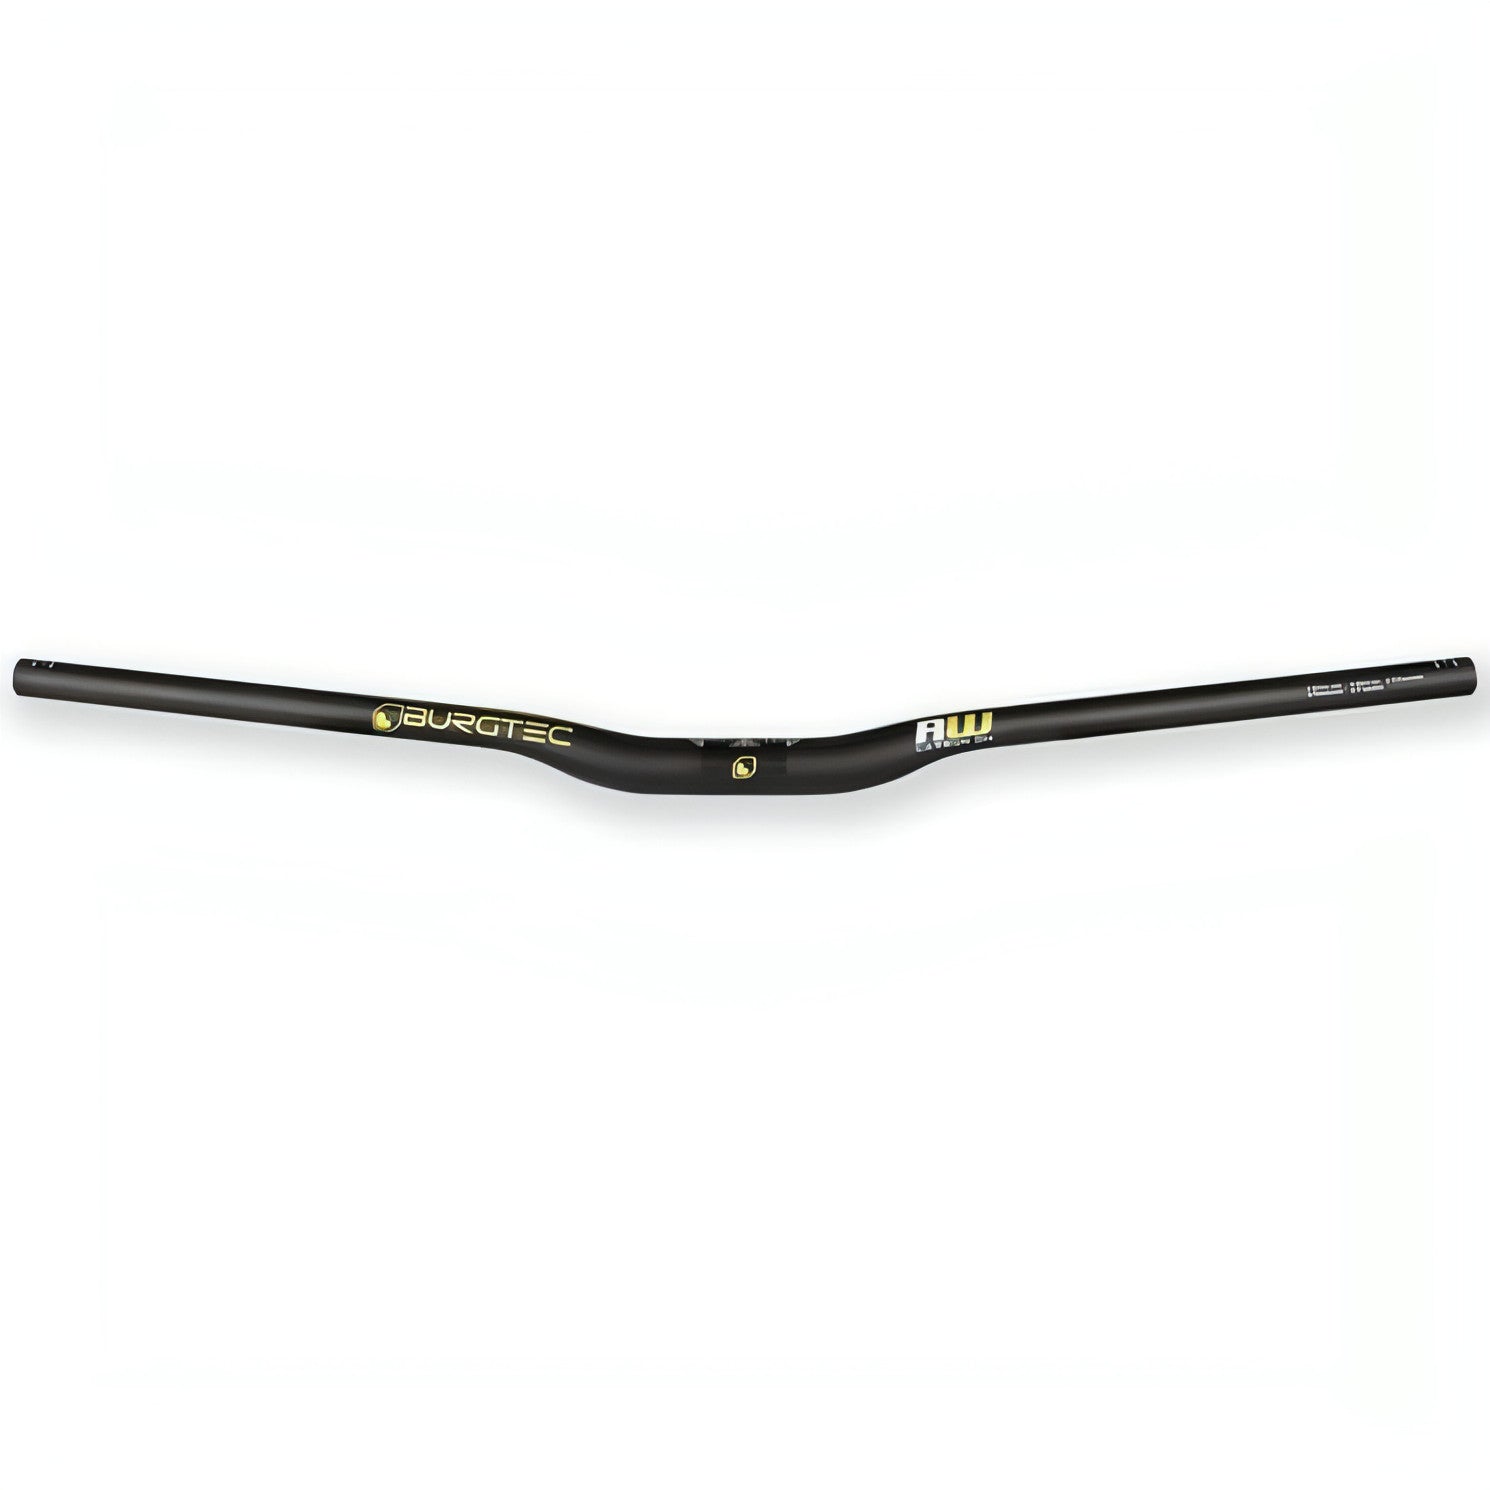 Burgtec RideWide 800mm Carbon DH Bars 31.8mm Clamp - Black 713830991508 - Start Fitness